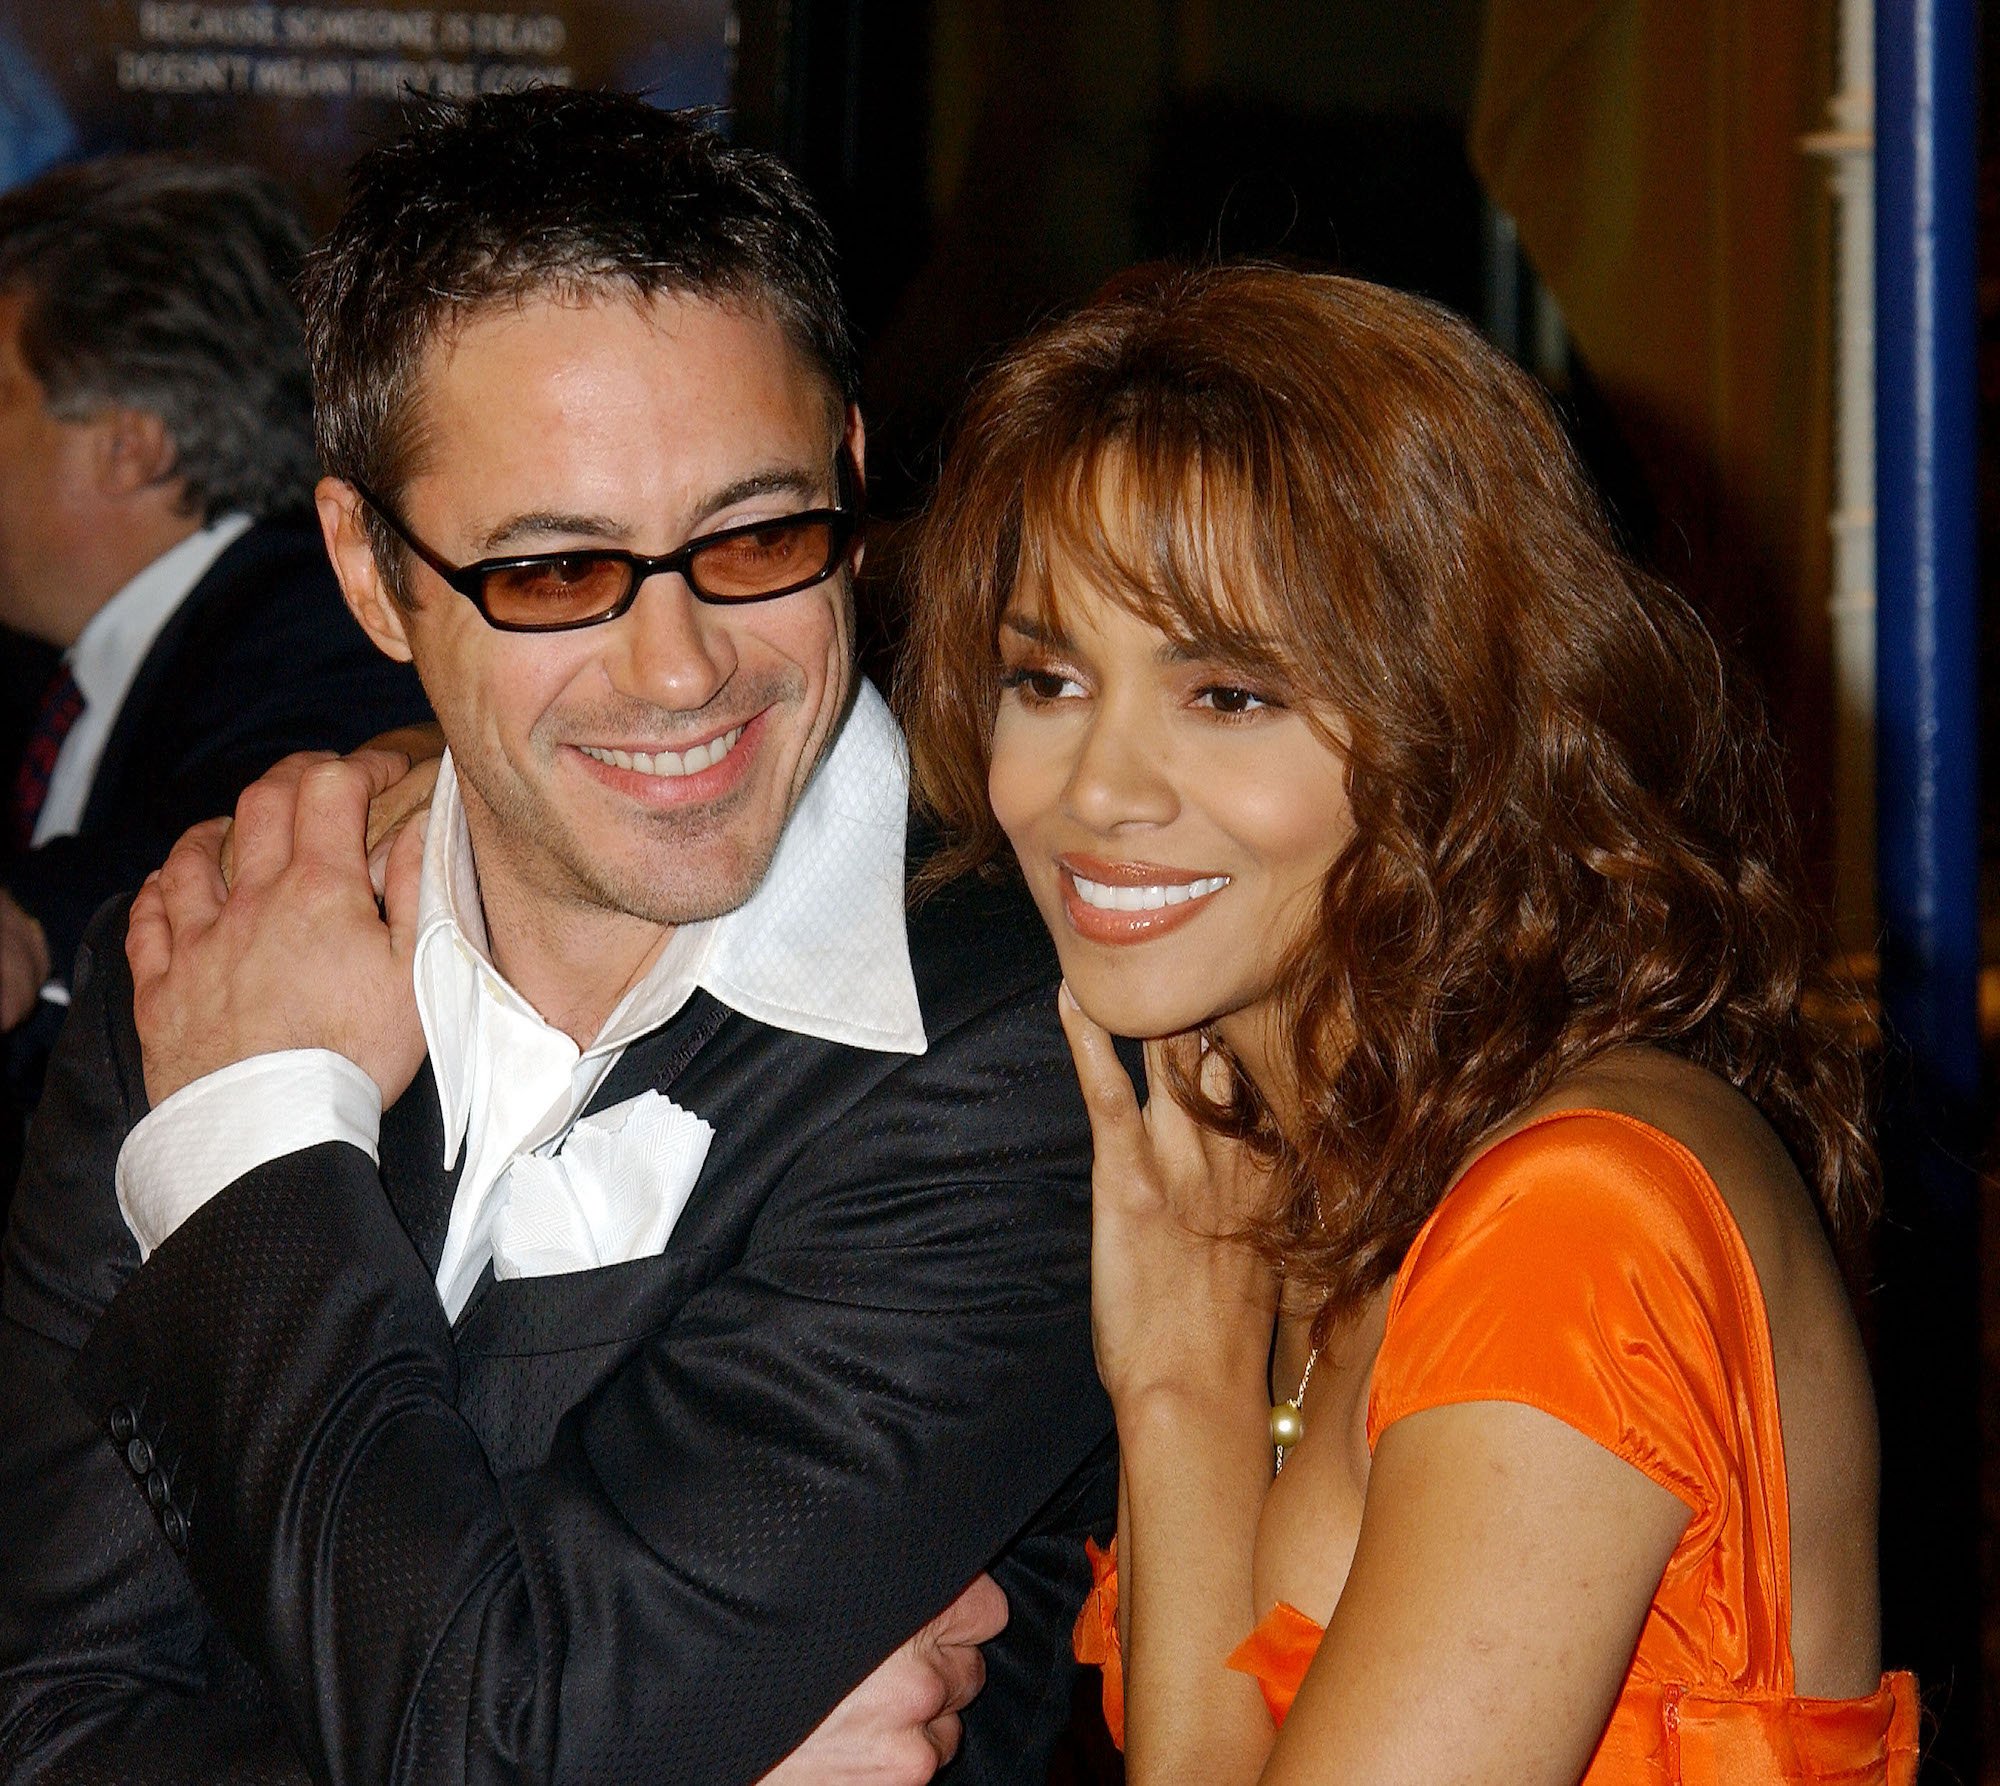 Robert Downey Jr. and Halle Berry during "Gothika" Premiere